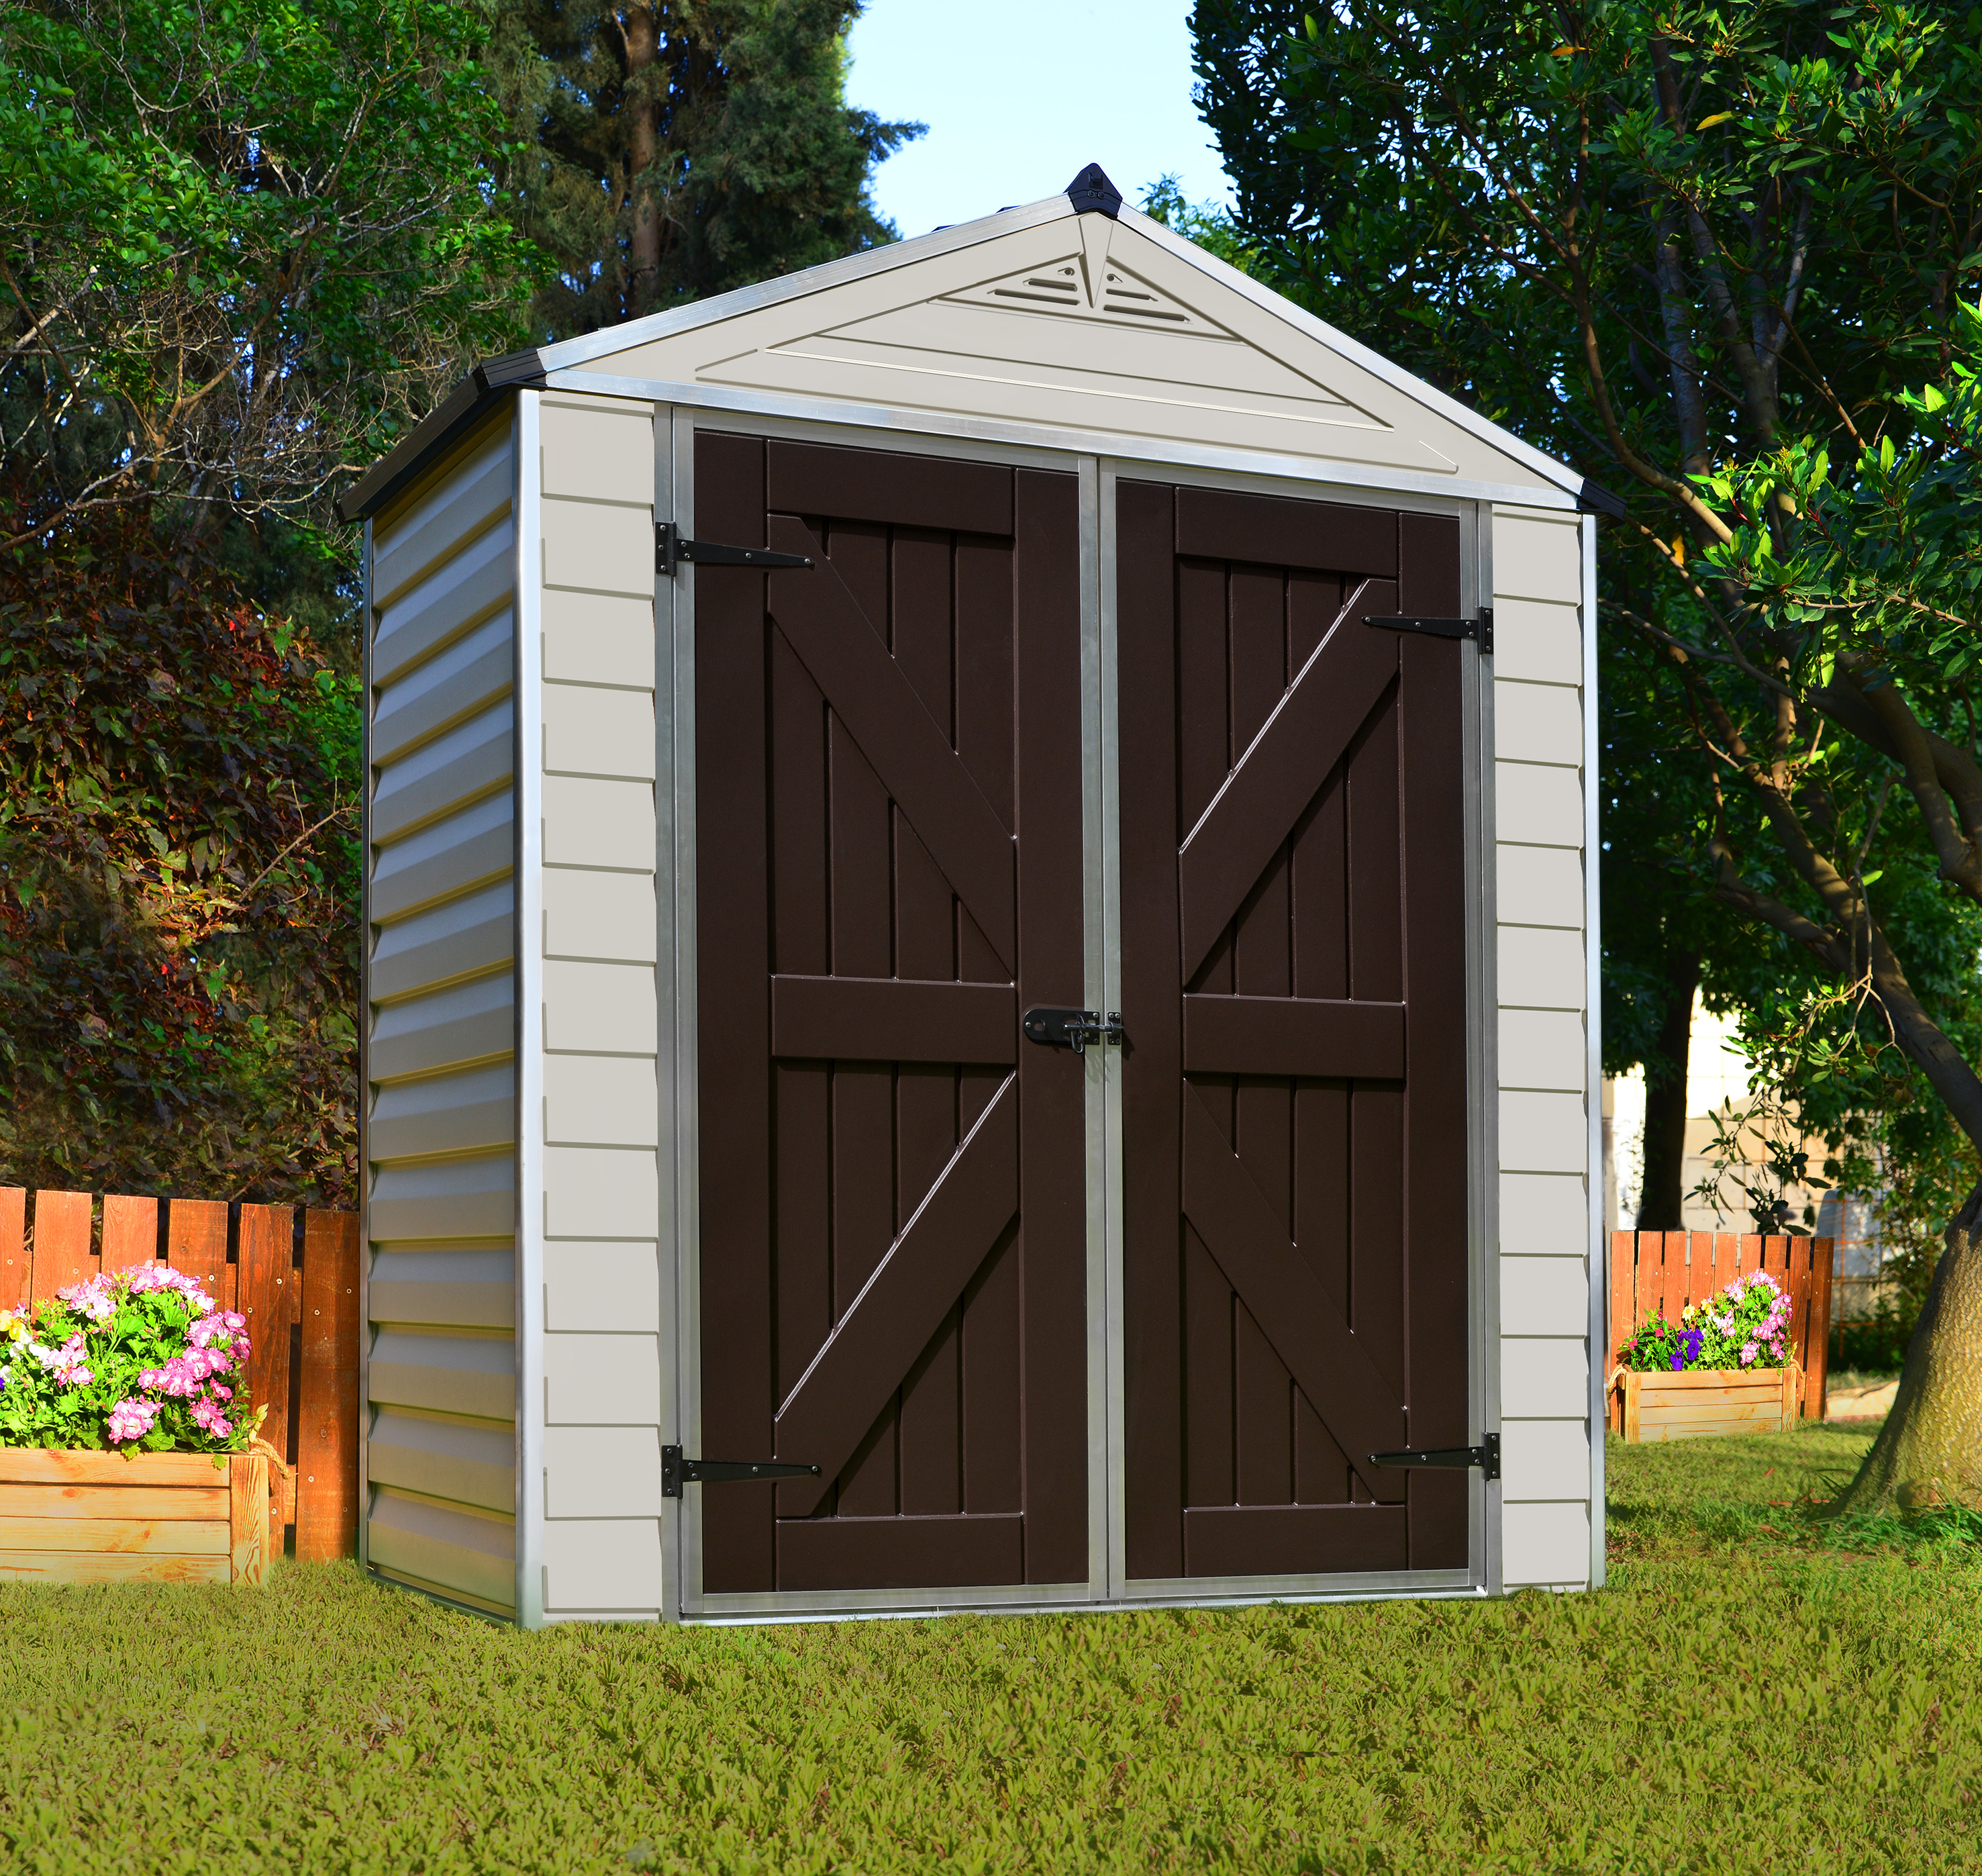 Palram - Canopia SkyLight 6' x 3' Polycarbonate/Aluminum Storage Shed -Tan/Brown - image 2 of 9